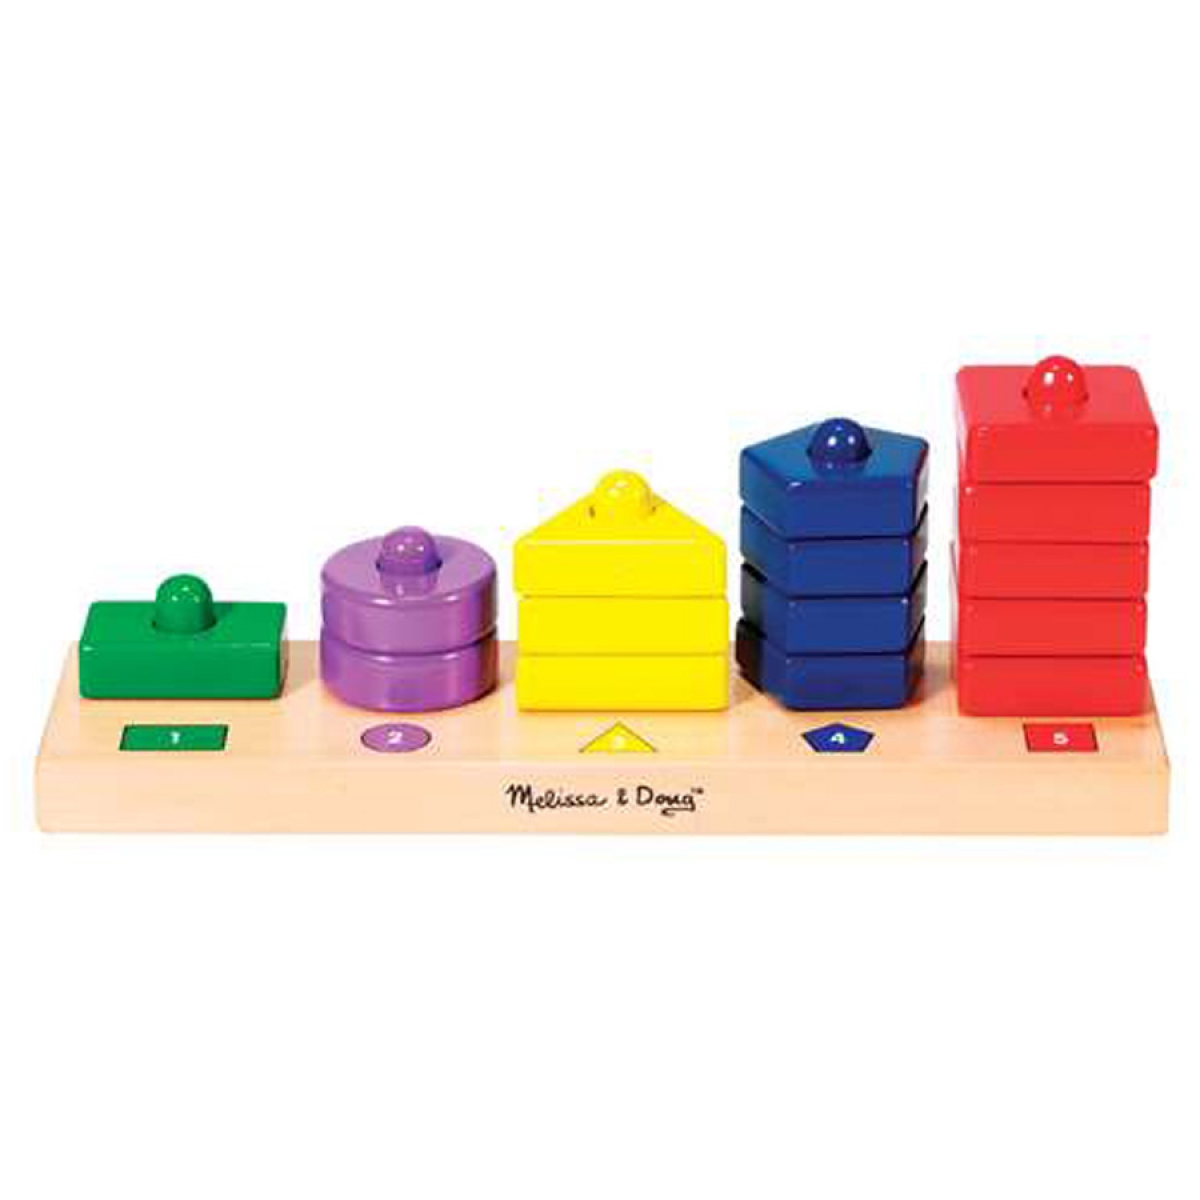 Melissa & Doug Stack and Sort Board Wooden Educational Toy with 15 Solid Wood Pieces